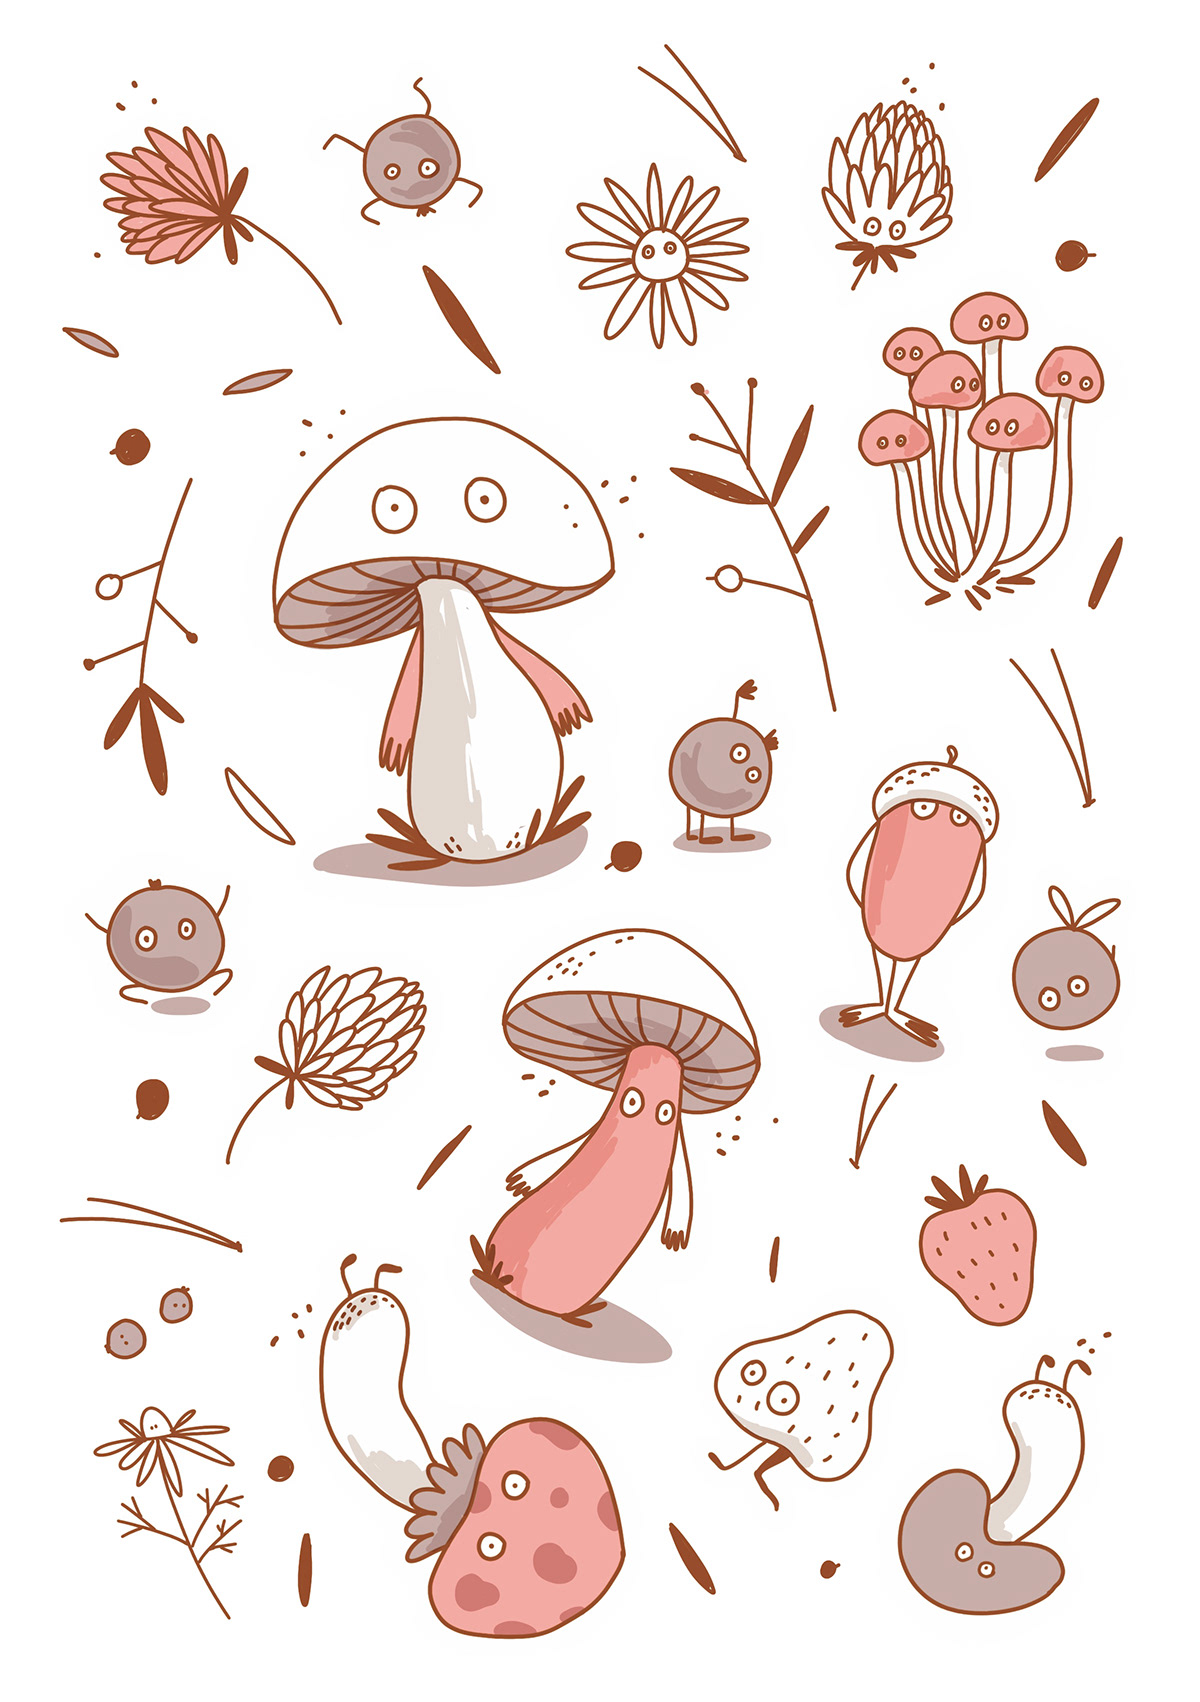 stickers graphics Mushrooms fruits crystals